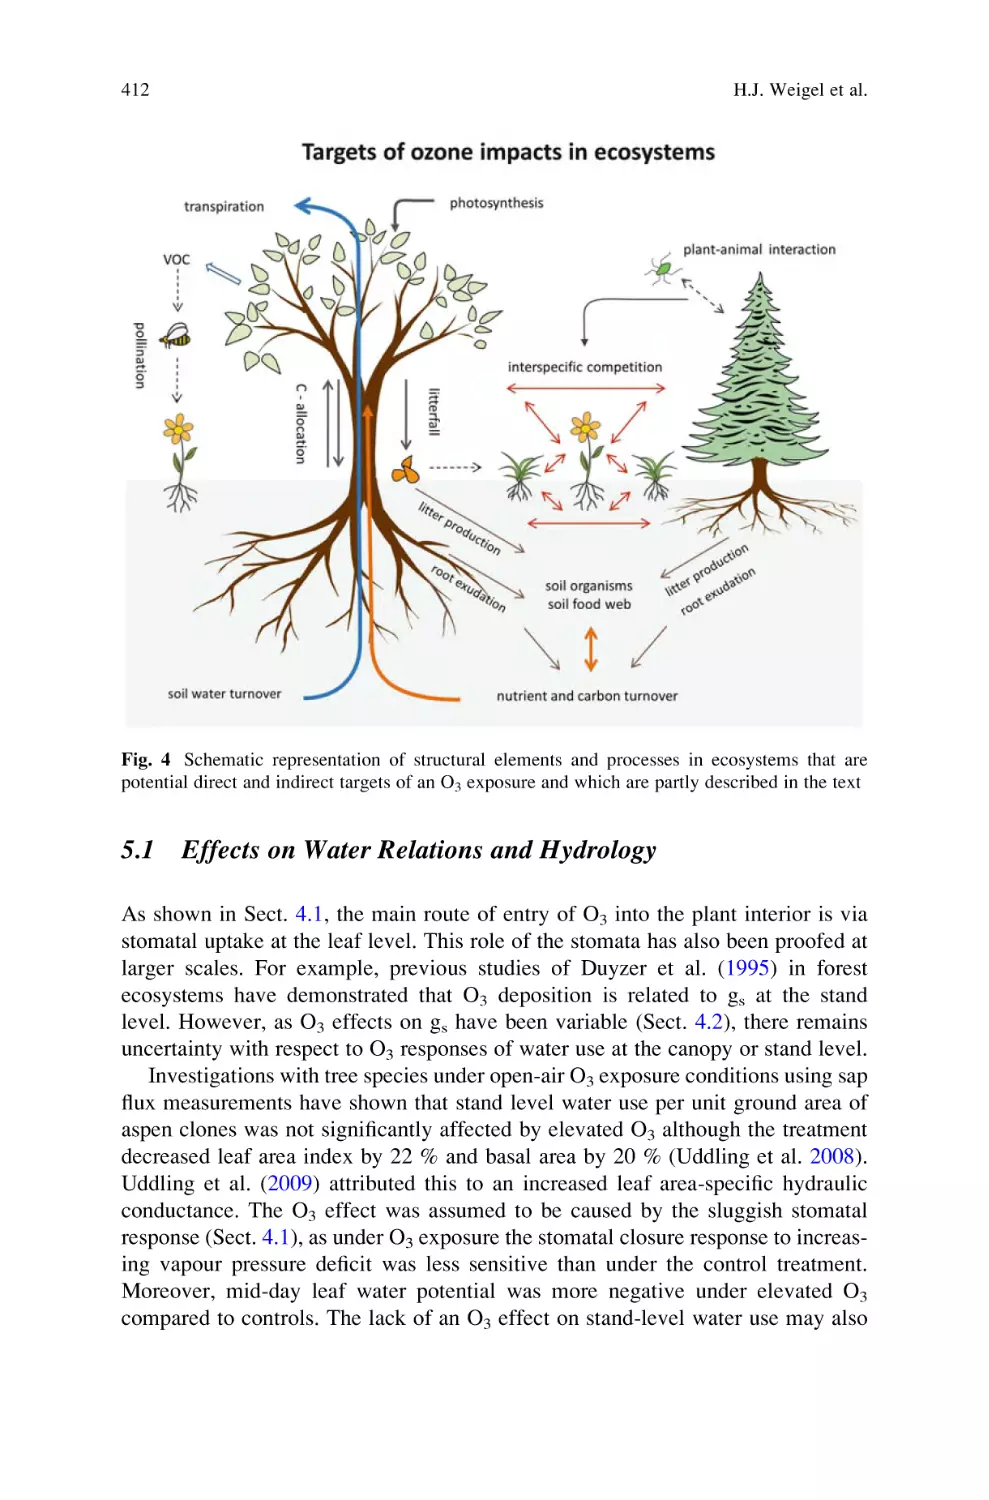 5.1 Effects on Water Relations and Hydrology